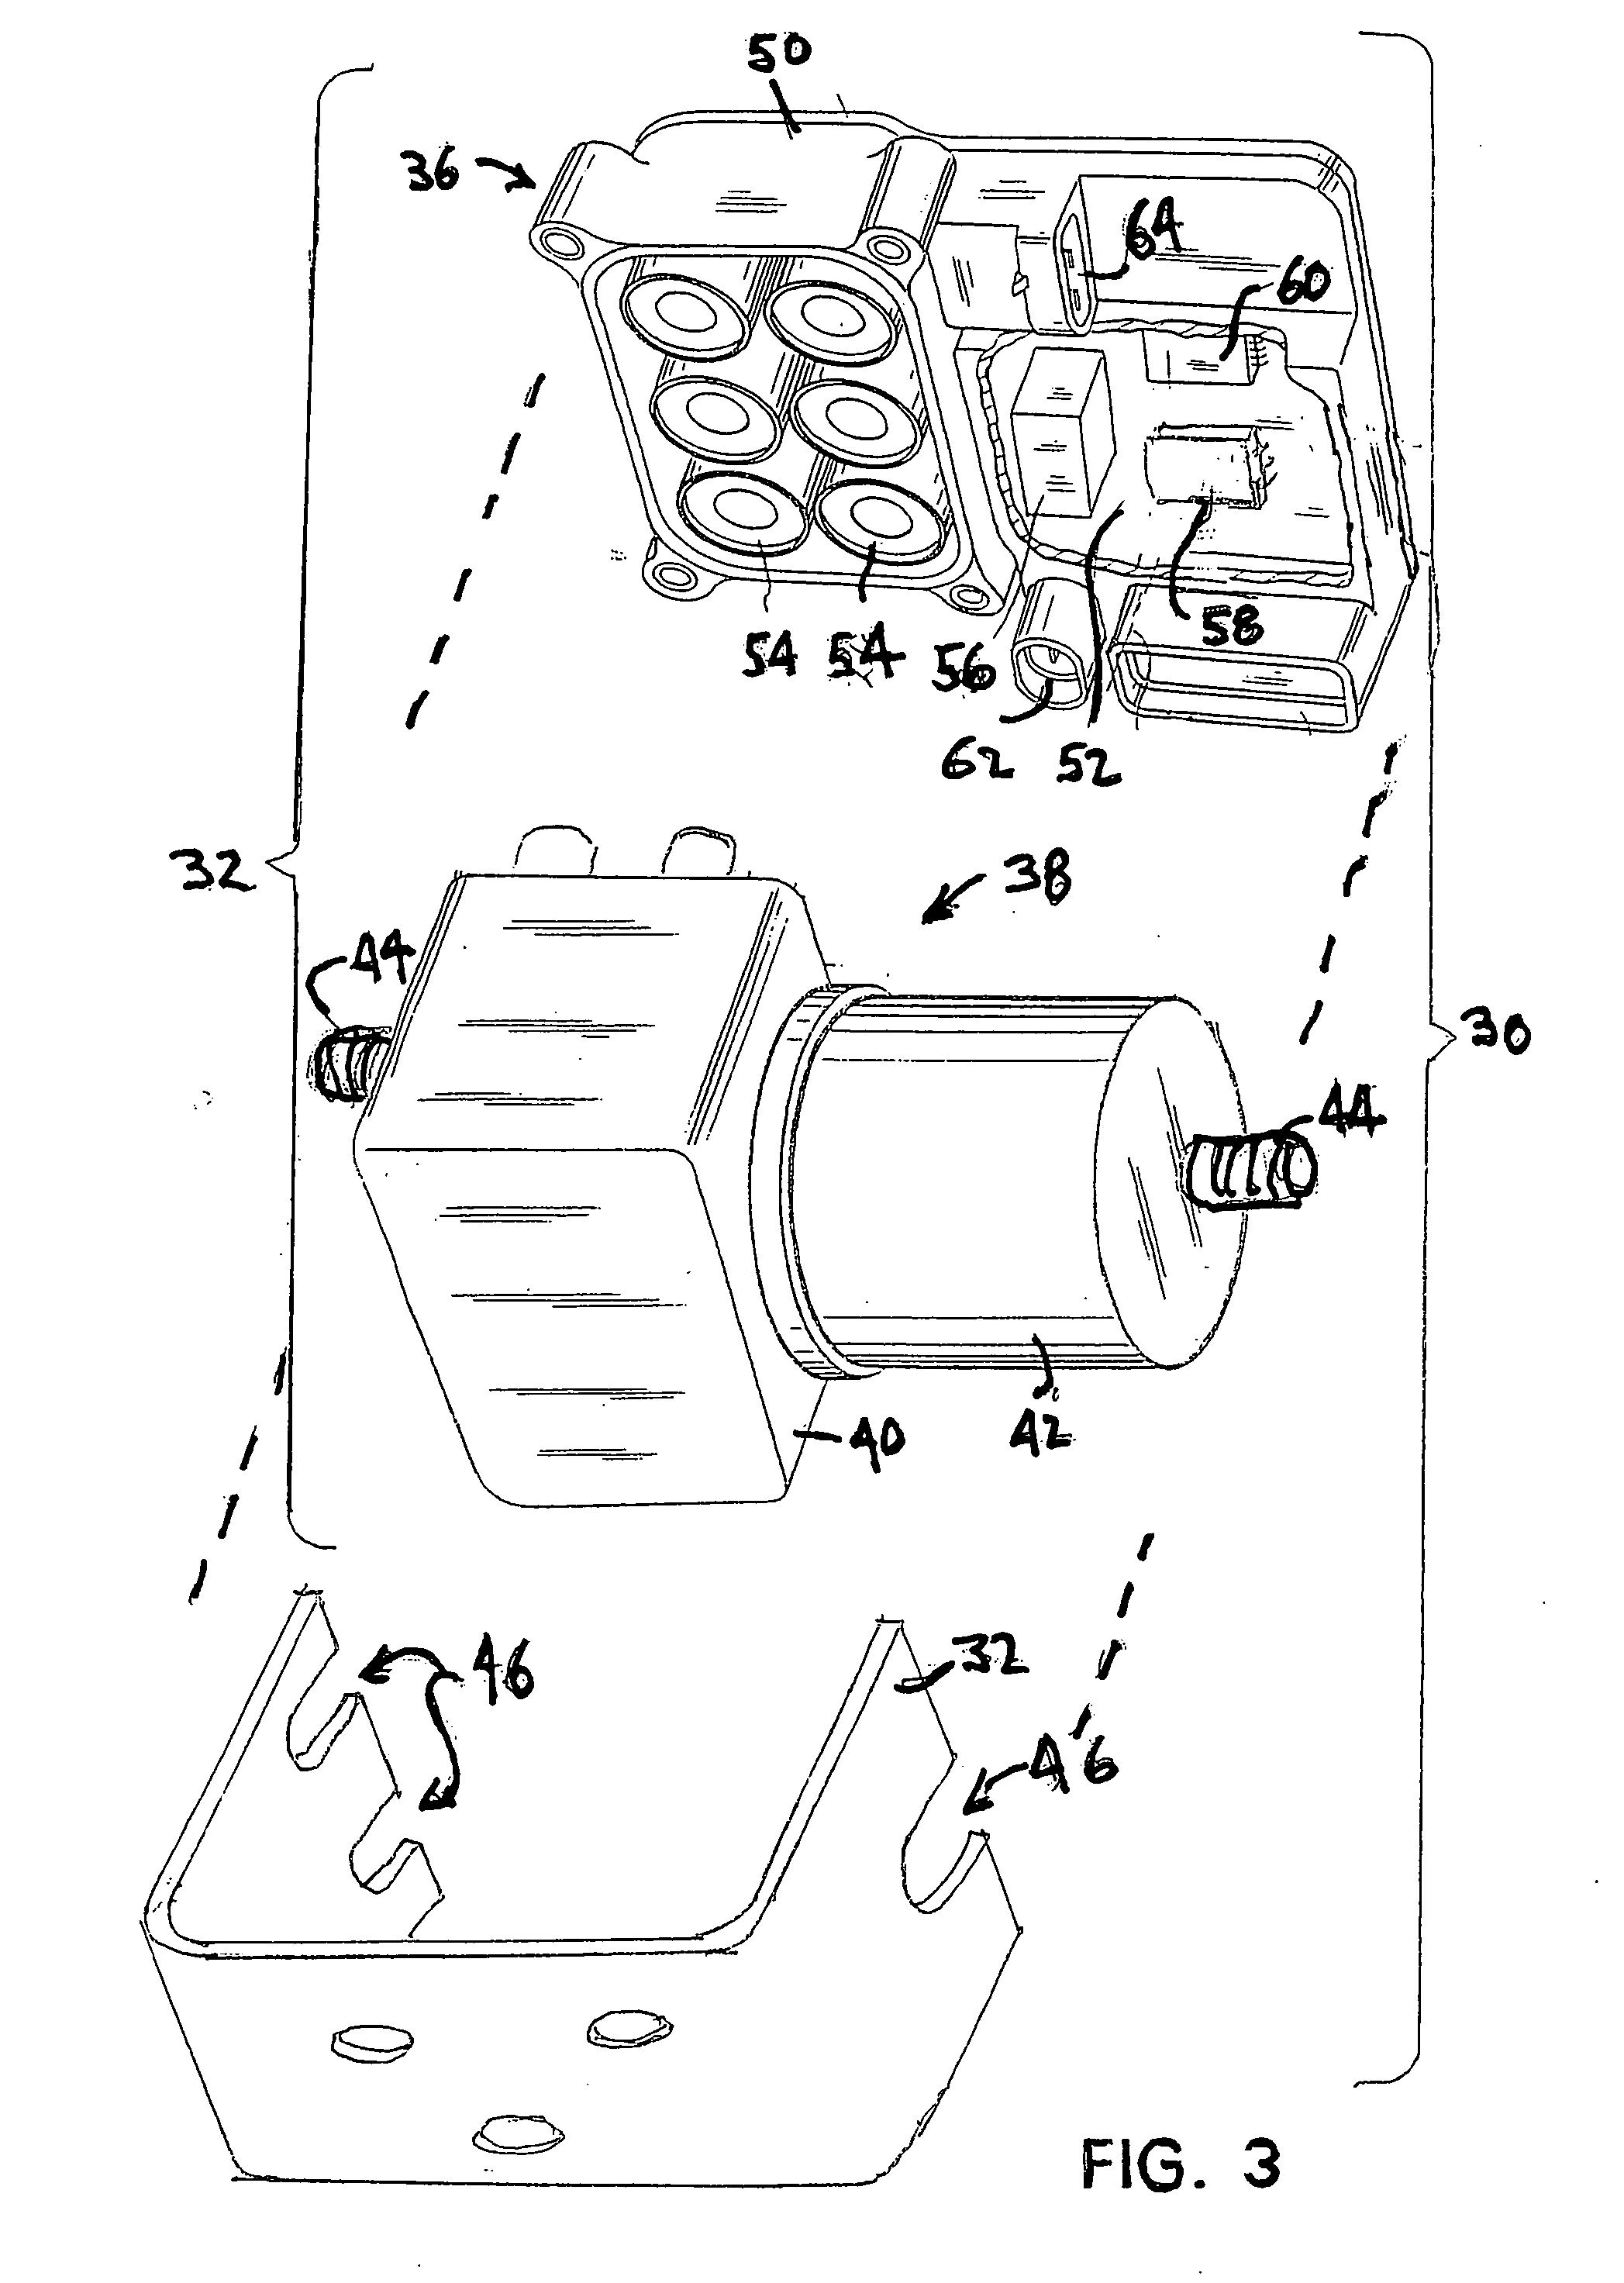 Method for correction of inertial sensor mounting offsets